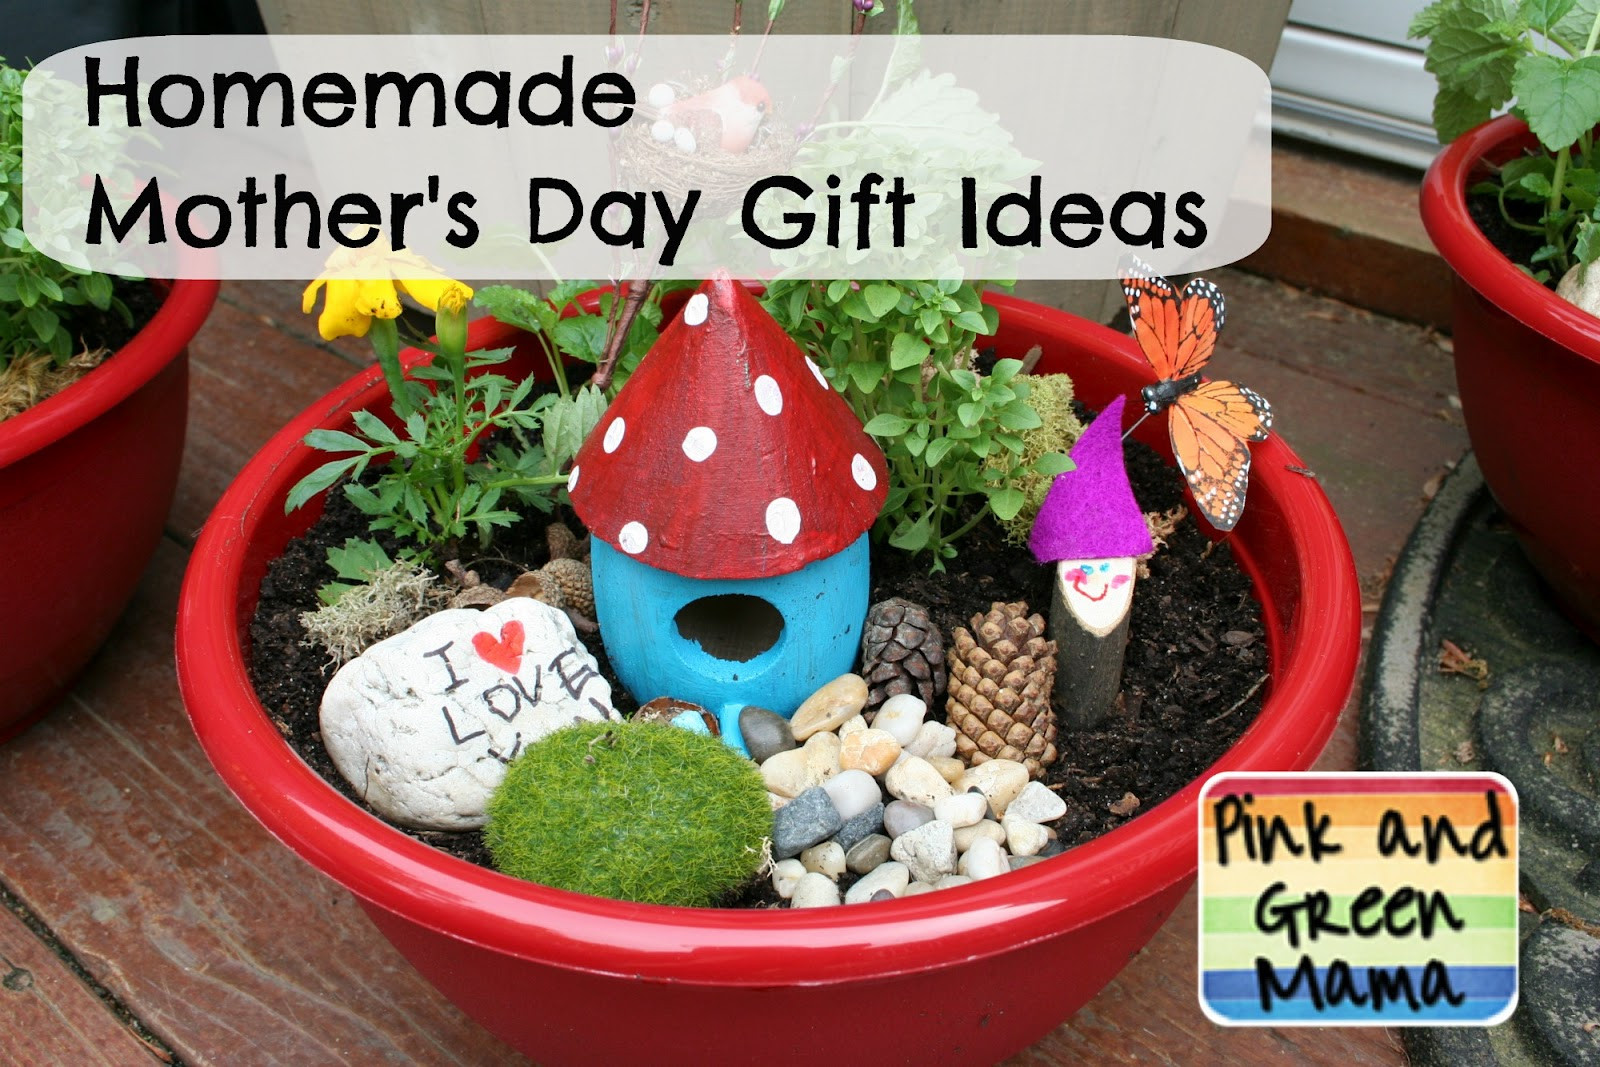 Mother Day Diy Gift Ideas
 Pink and Green Mama Homemade Mother s Day Gift Ideas